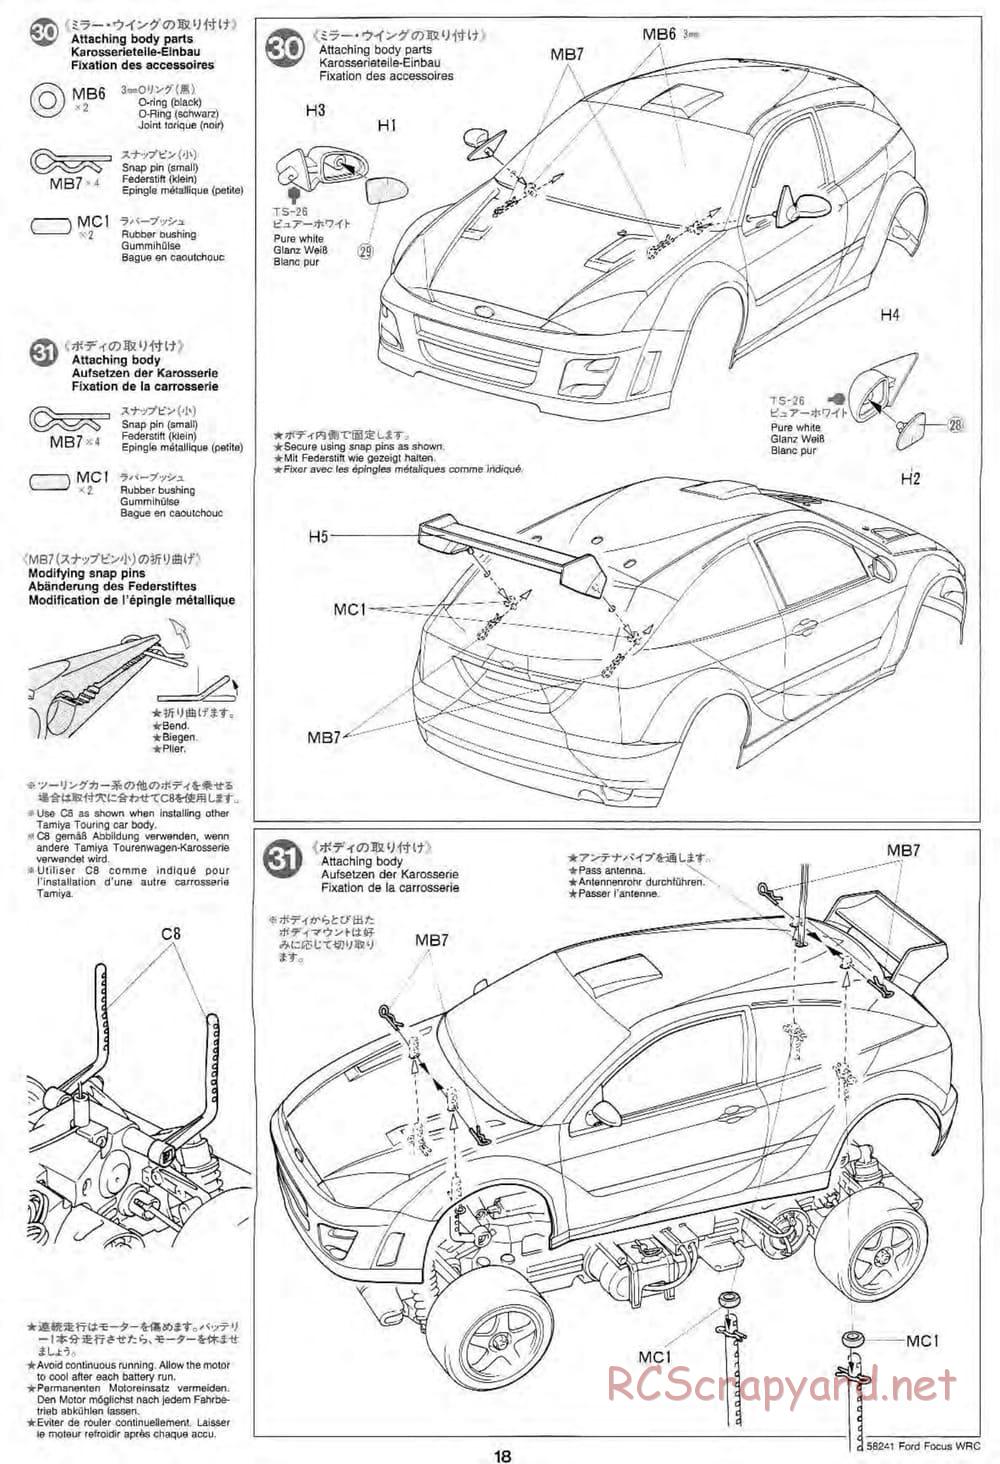 Tamiya - Ford Focus WRC - TL-01 Chassis - Manual - Page 18